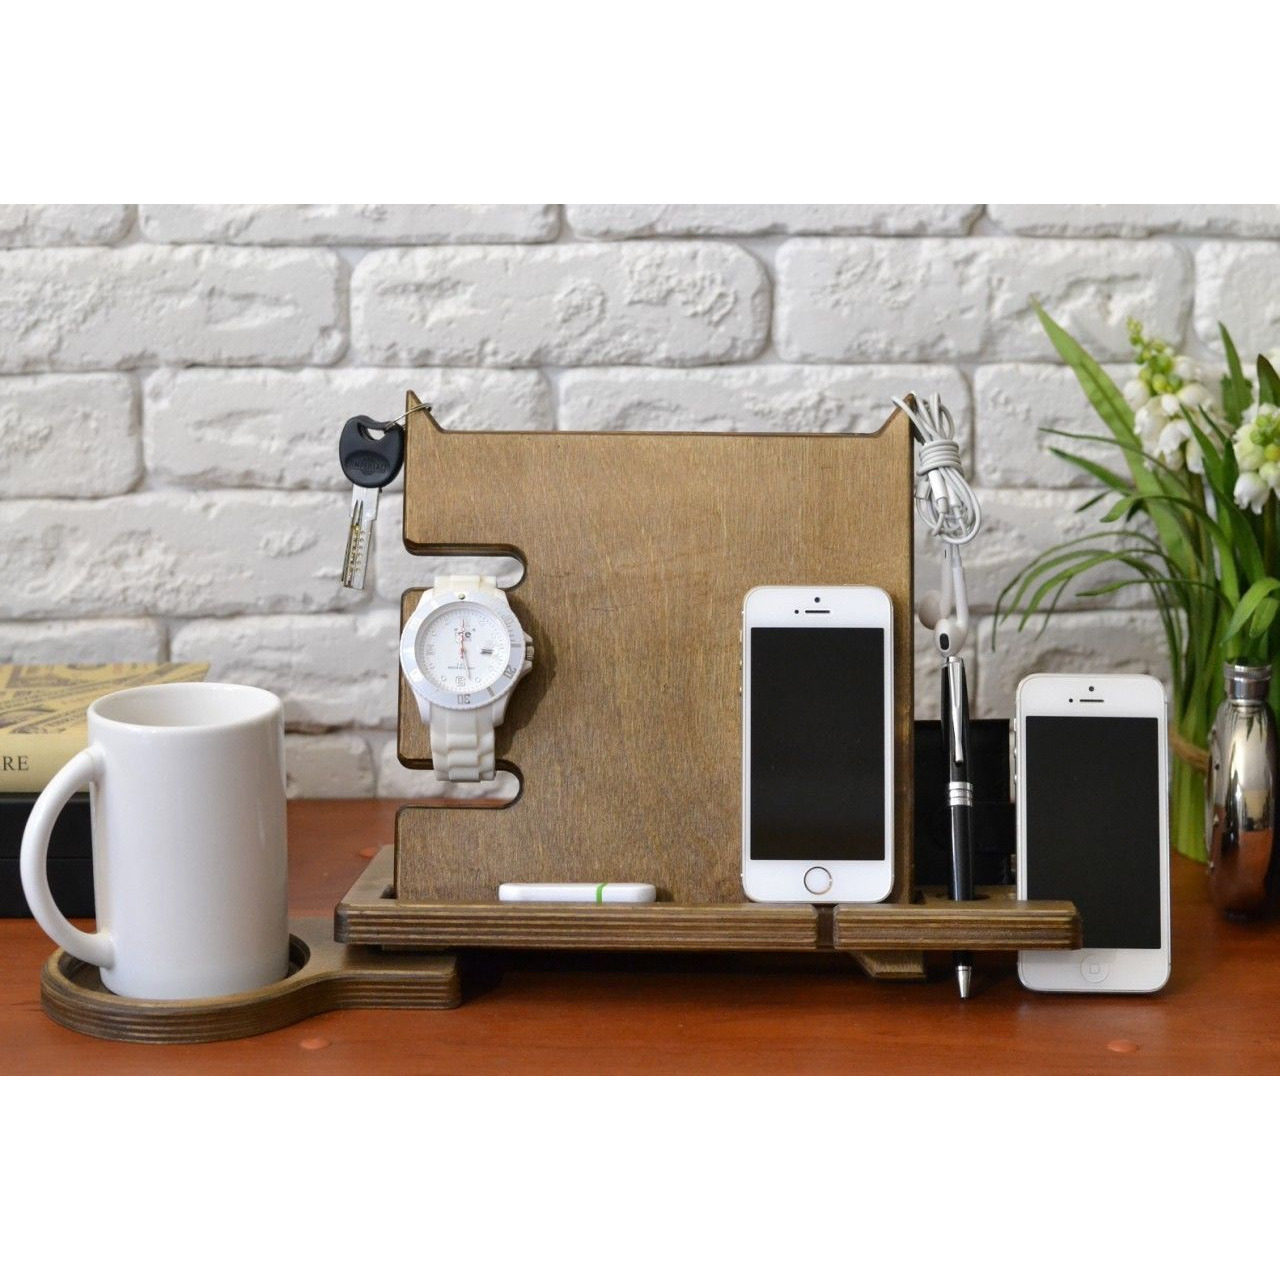 Winmaarc Wooden Brown Docking Station Phone Charge Holder Organizer Gift